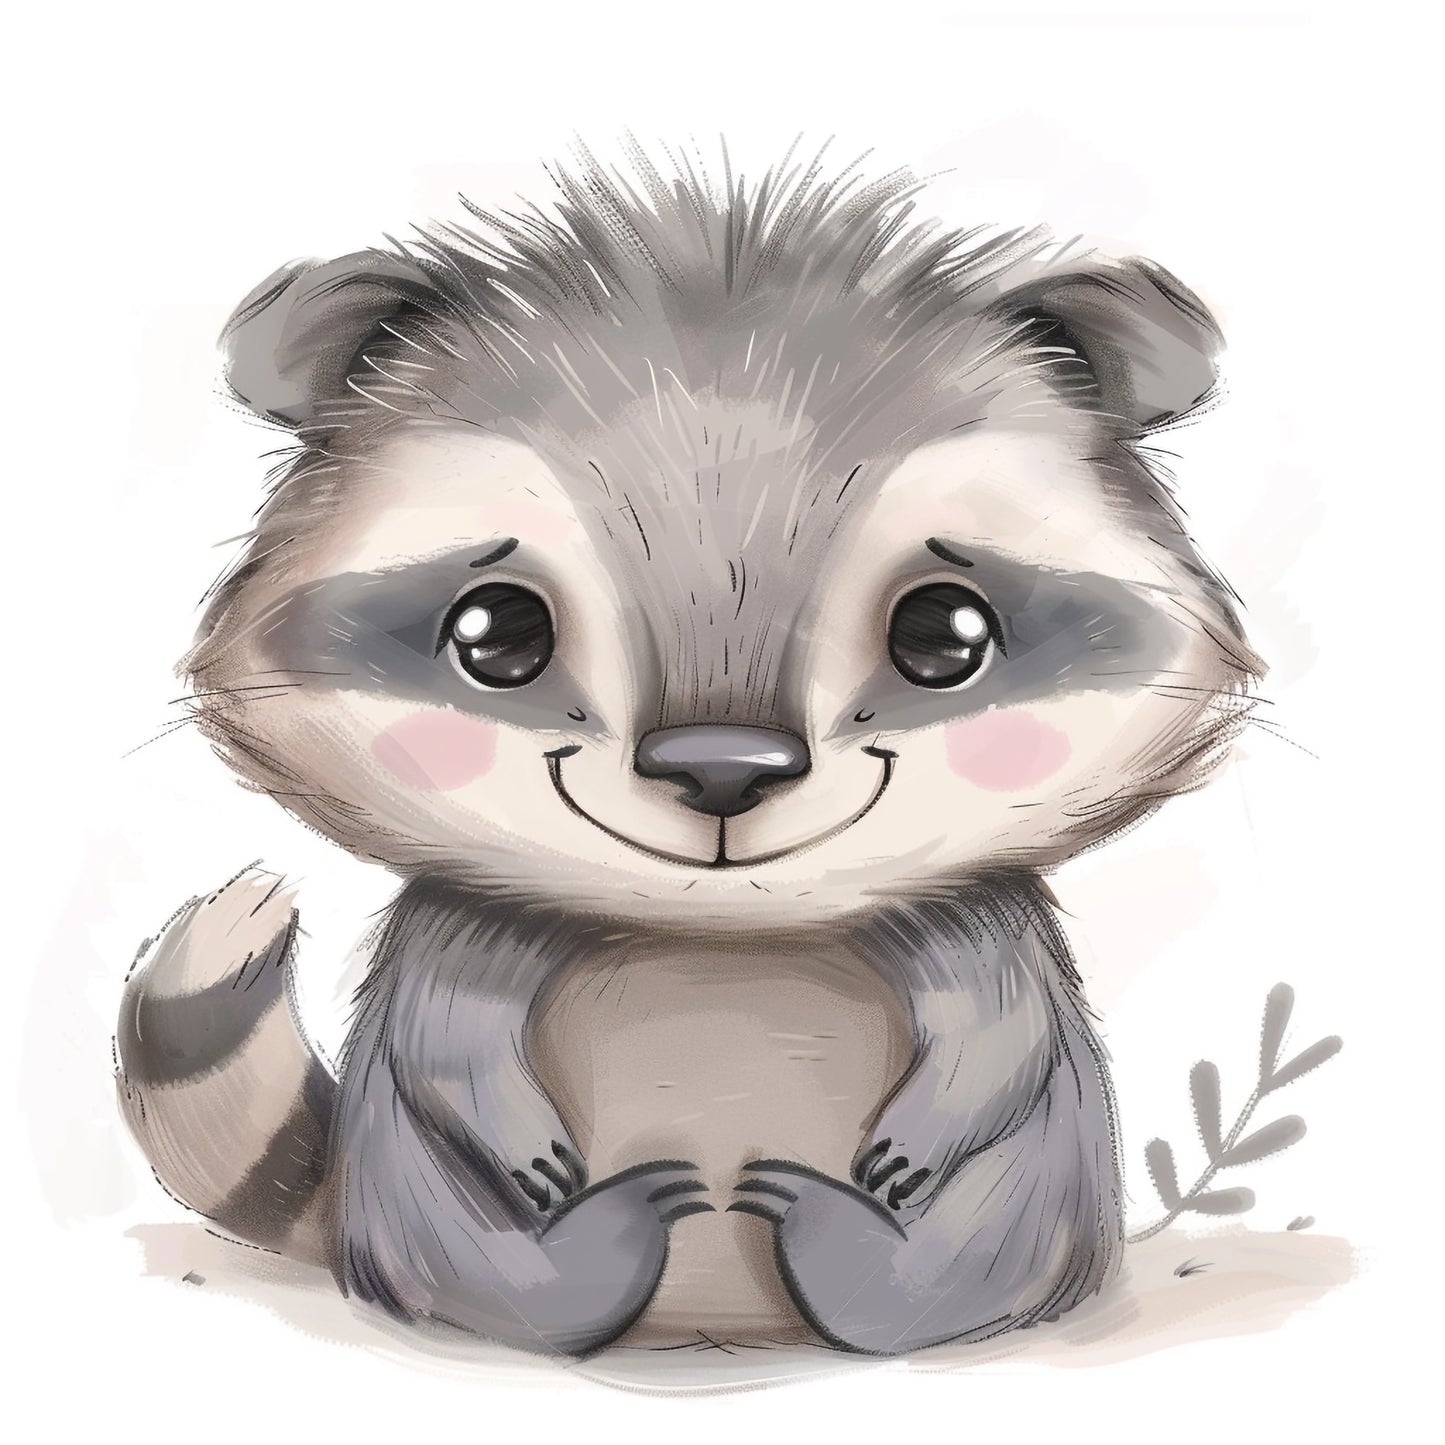 Adorable American Badger Illustration with Cute Expression